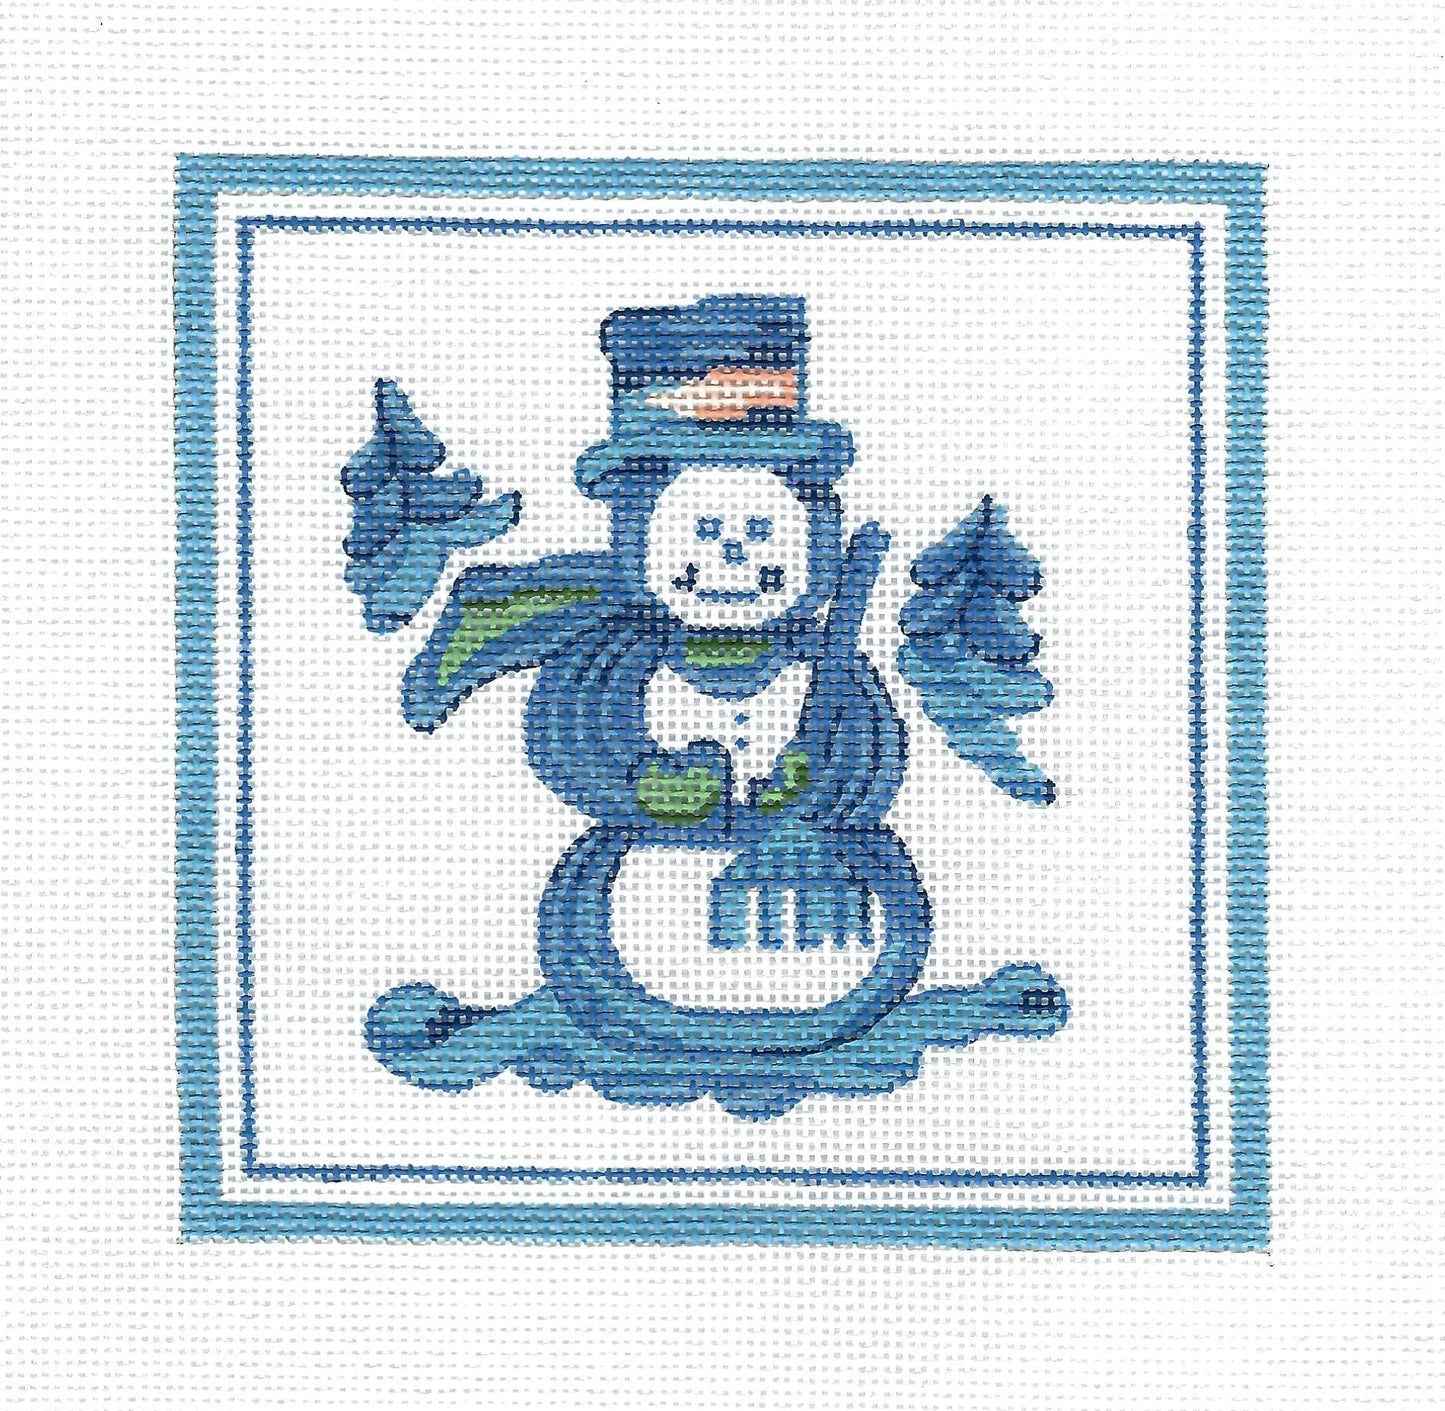 Hadley Pottery ~ SNOWMAN  handpainted 5" Square Needlepoint Canvas 5"x5" by Silver Needle